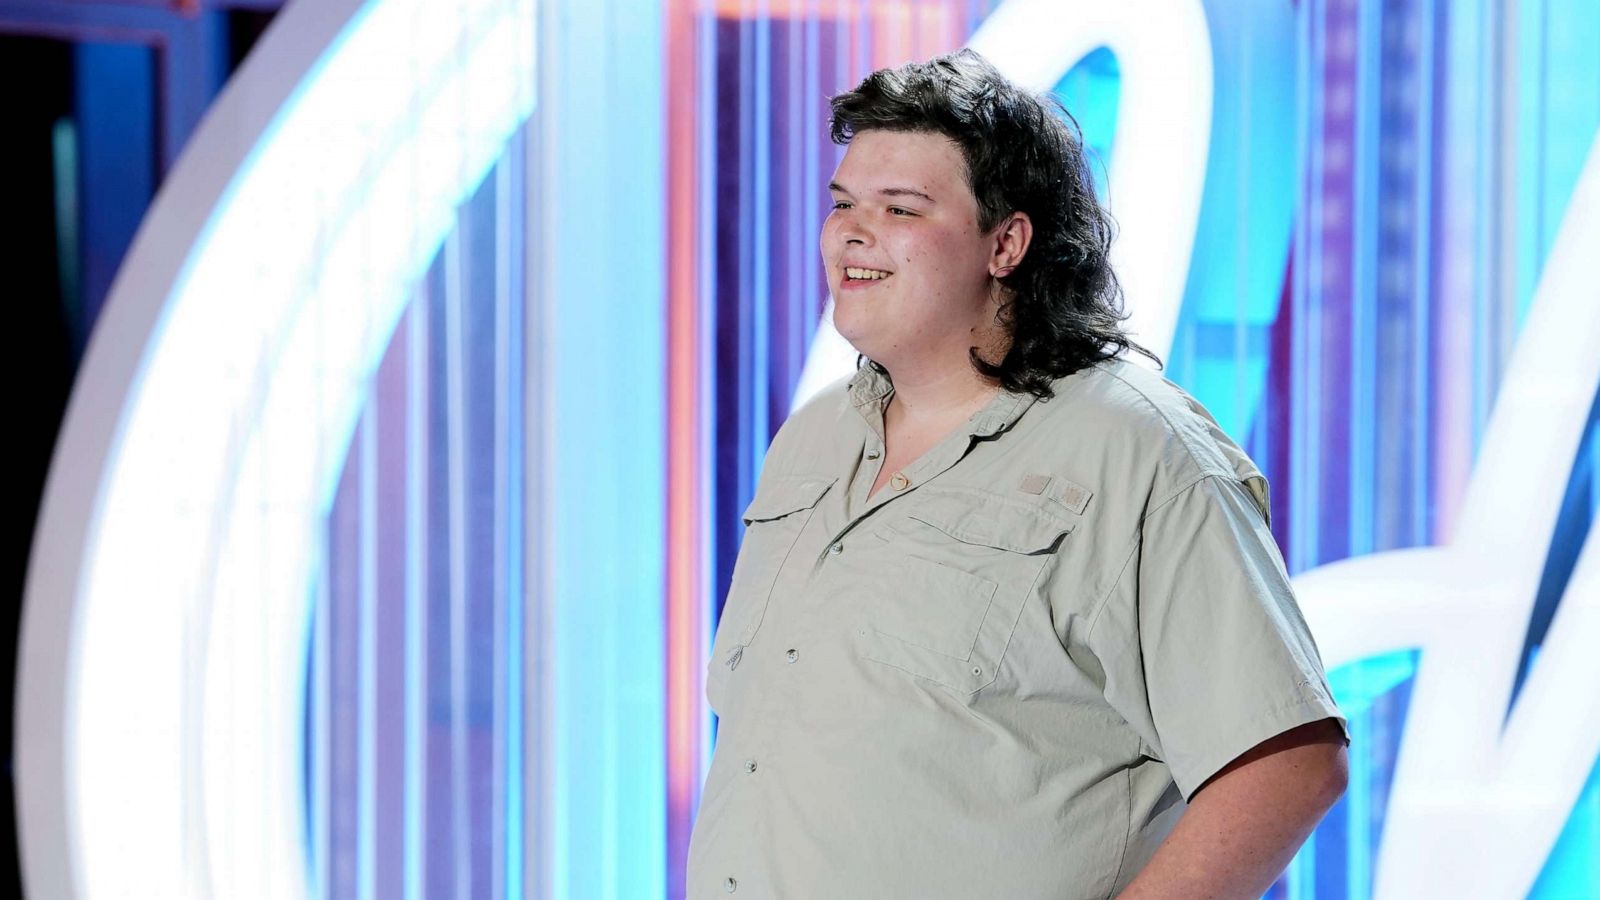 PHOTO: Trey Louis auditions for "American Idol."